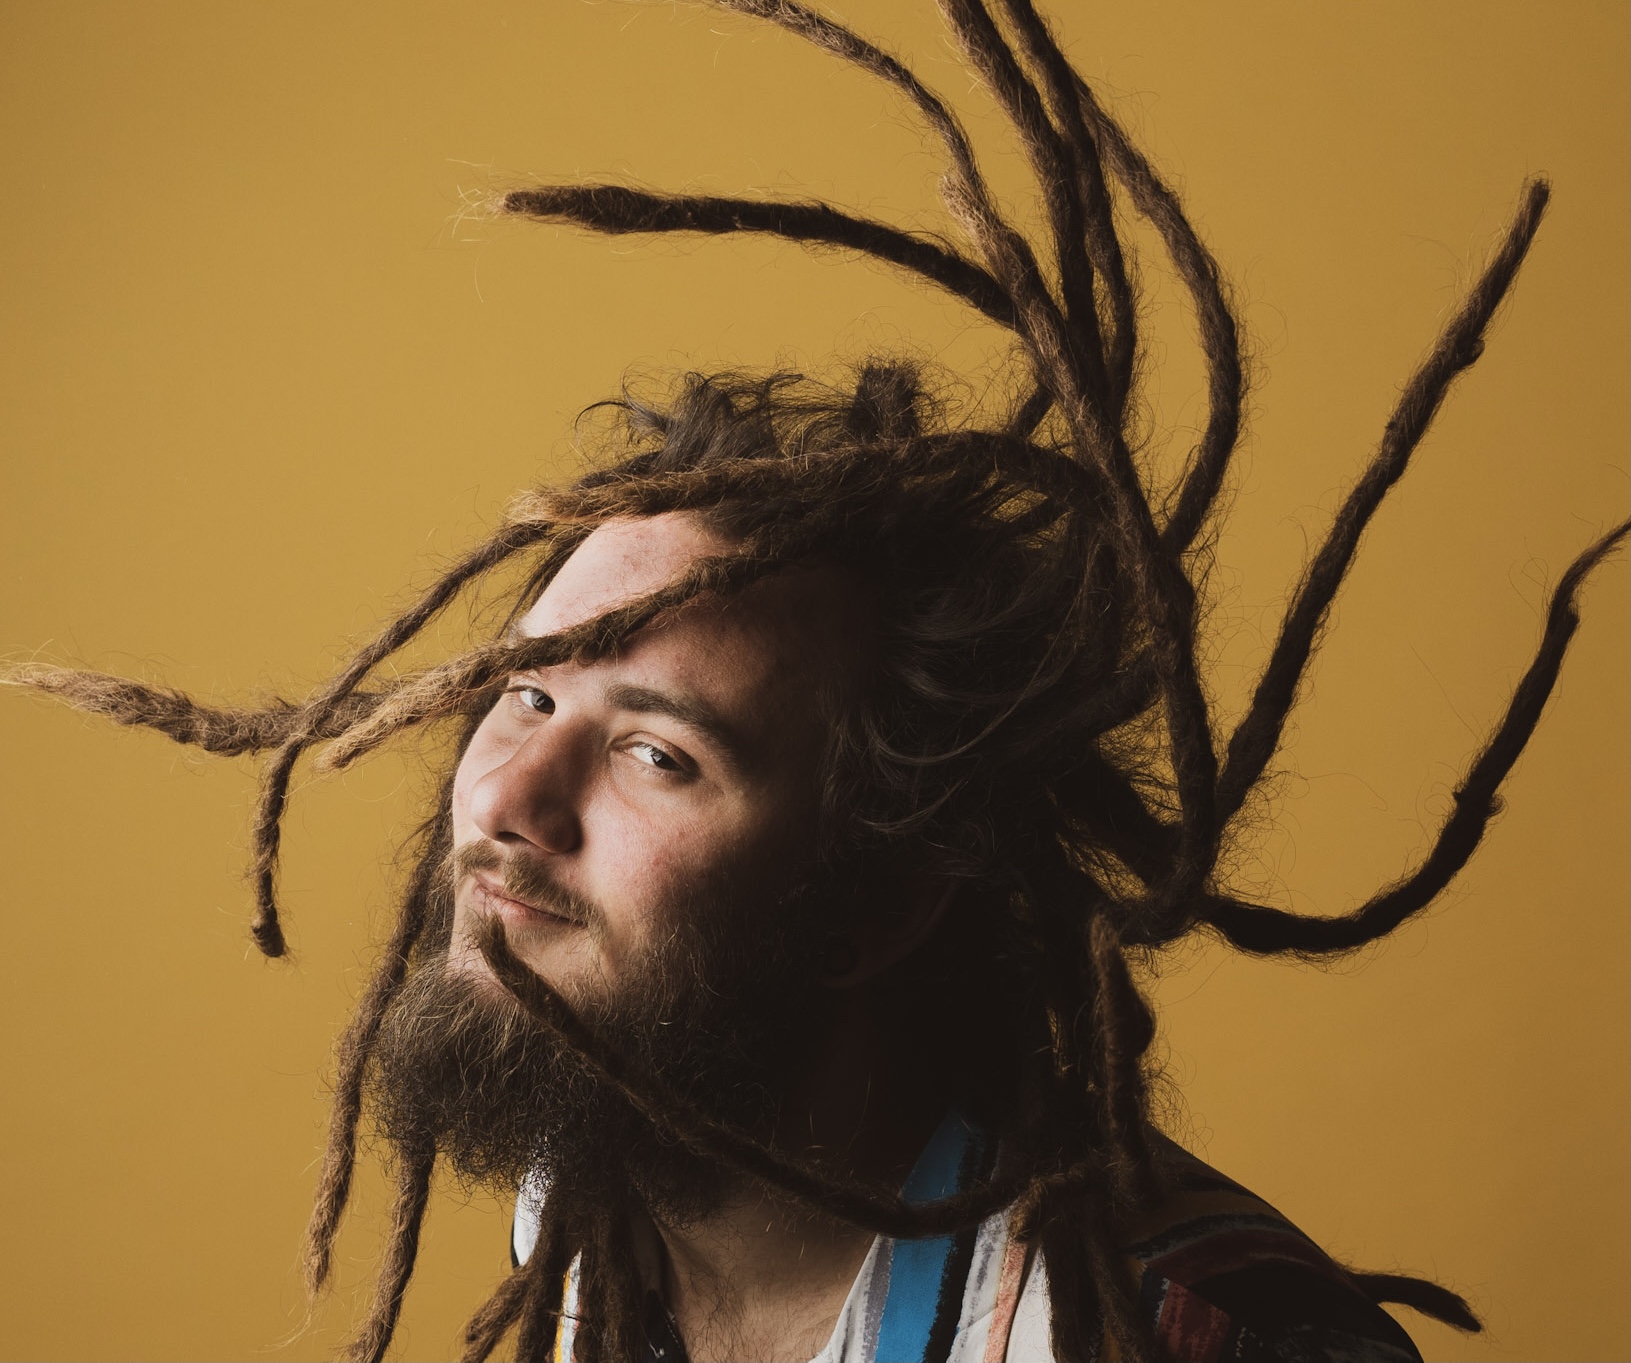 Up-And-Coming Reggae Band Free Mace’s Brand-New Album ‘Media’ Debuts on Spotify